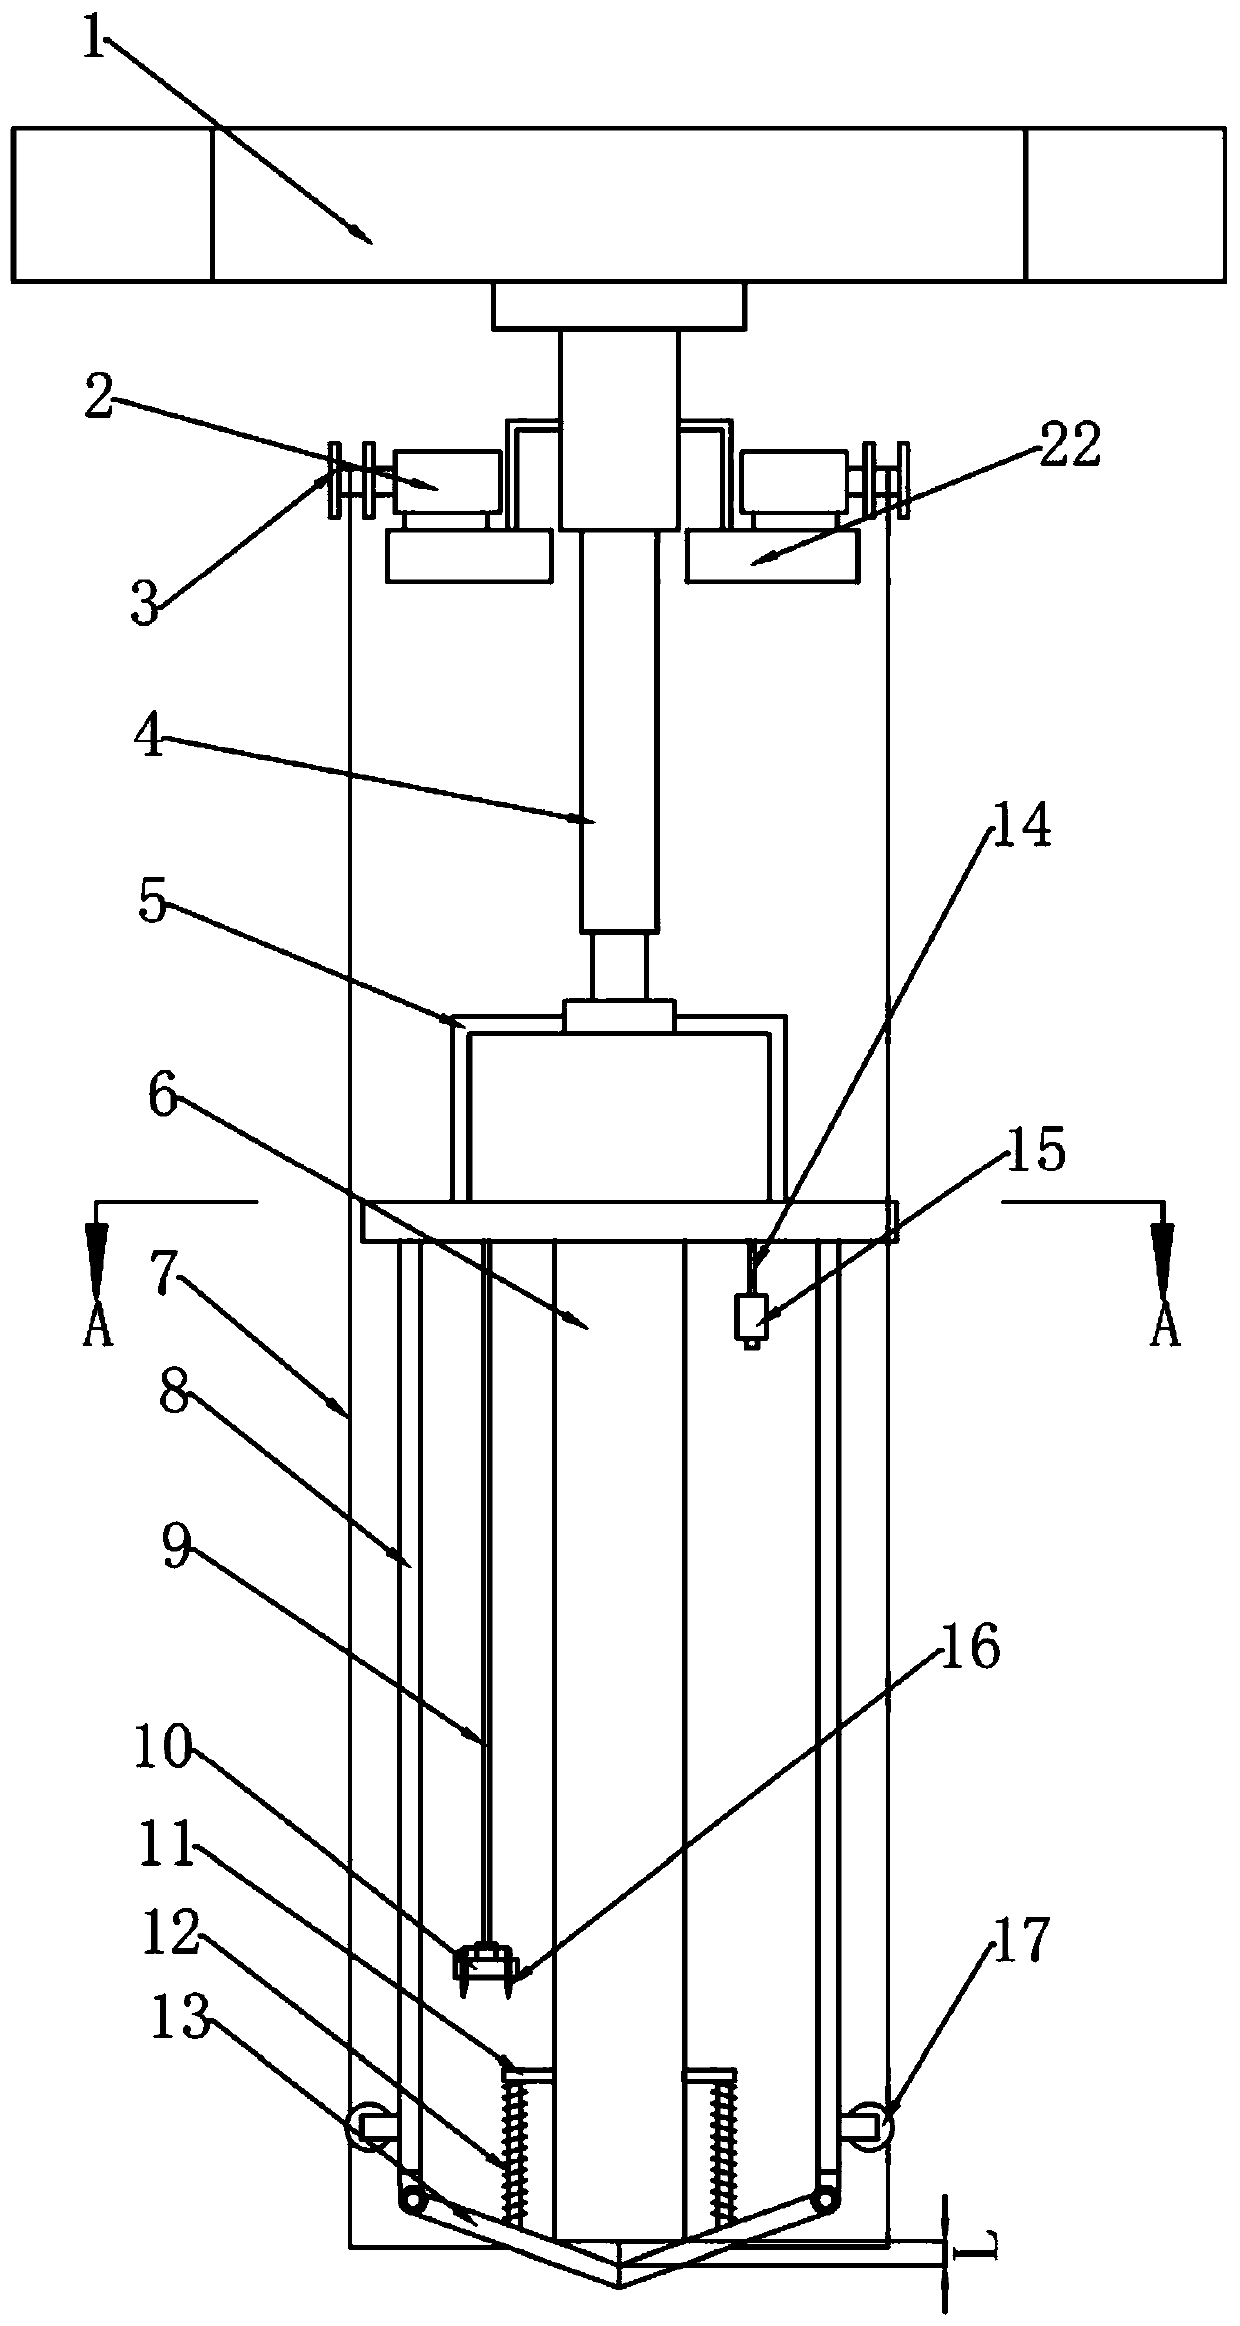 Farmland drainage ditch sediment sampling device and in-situ on-line detection method